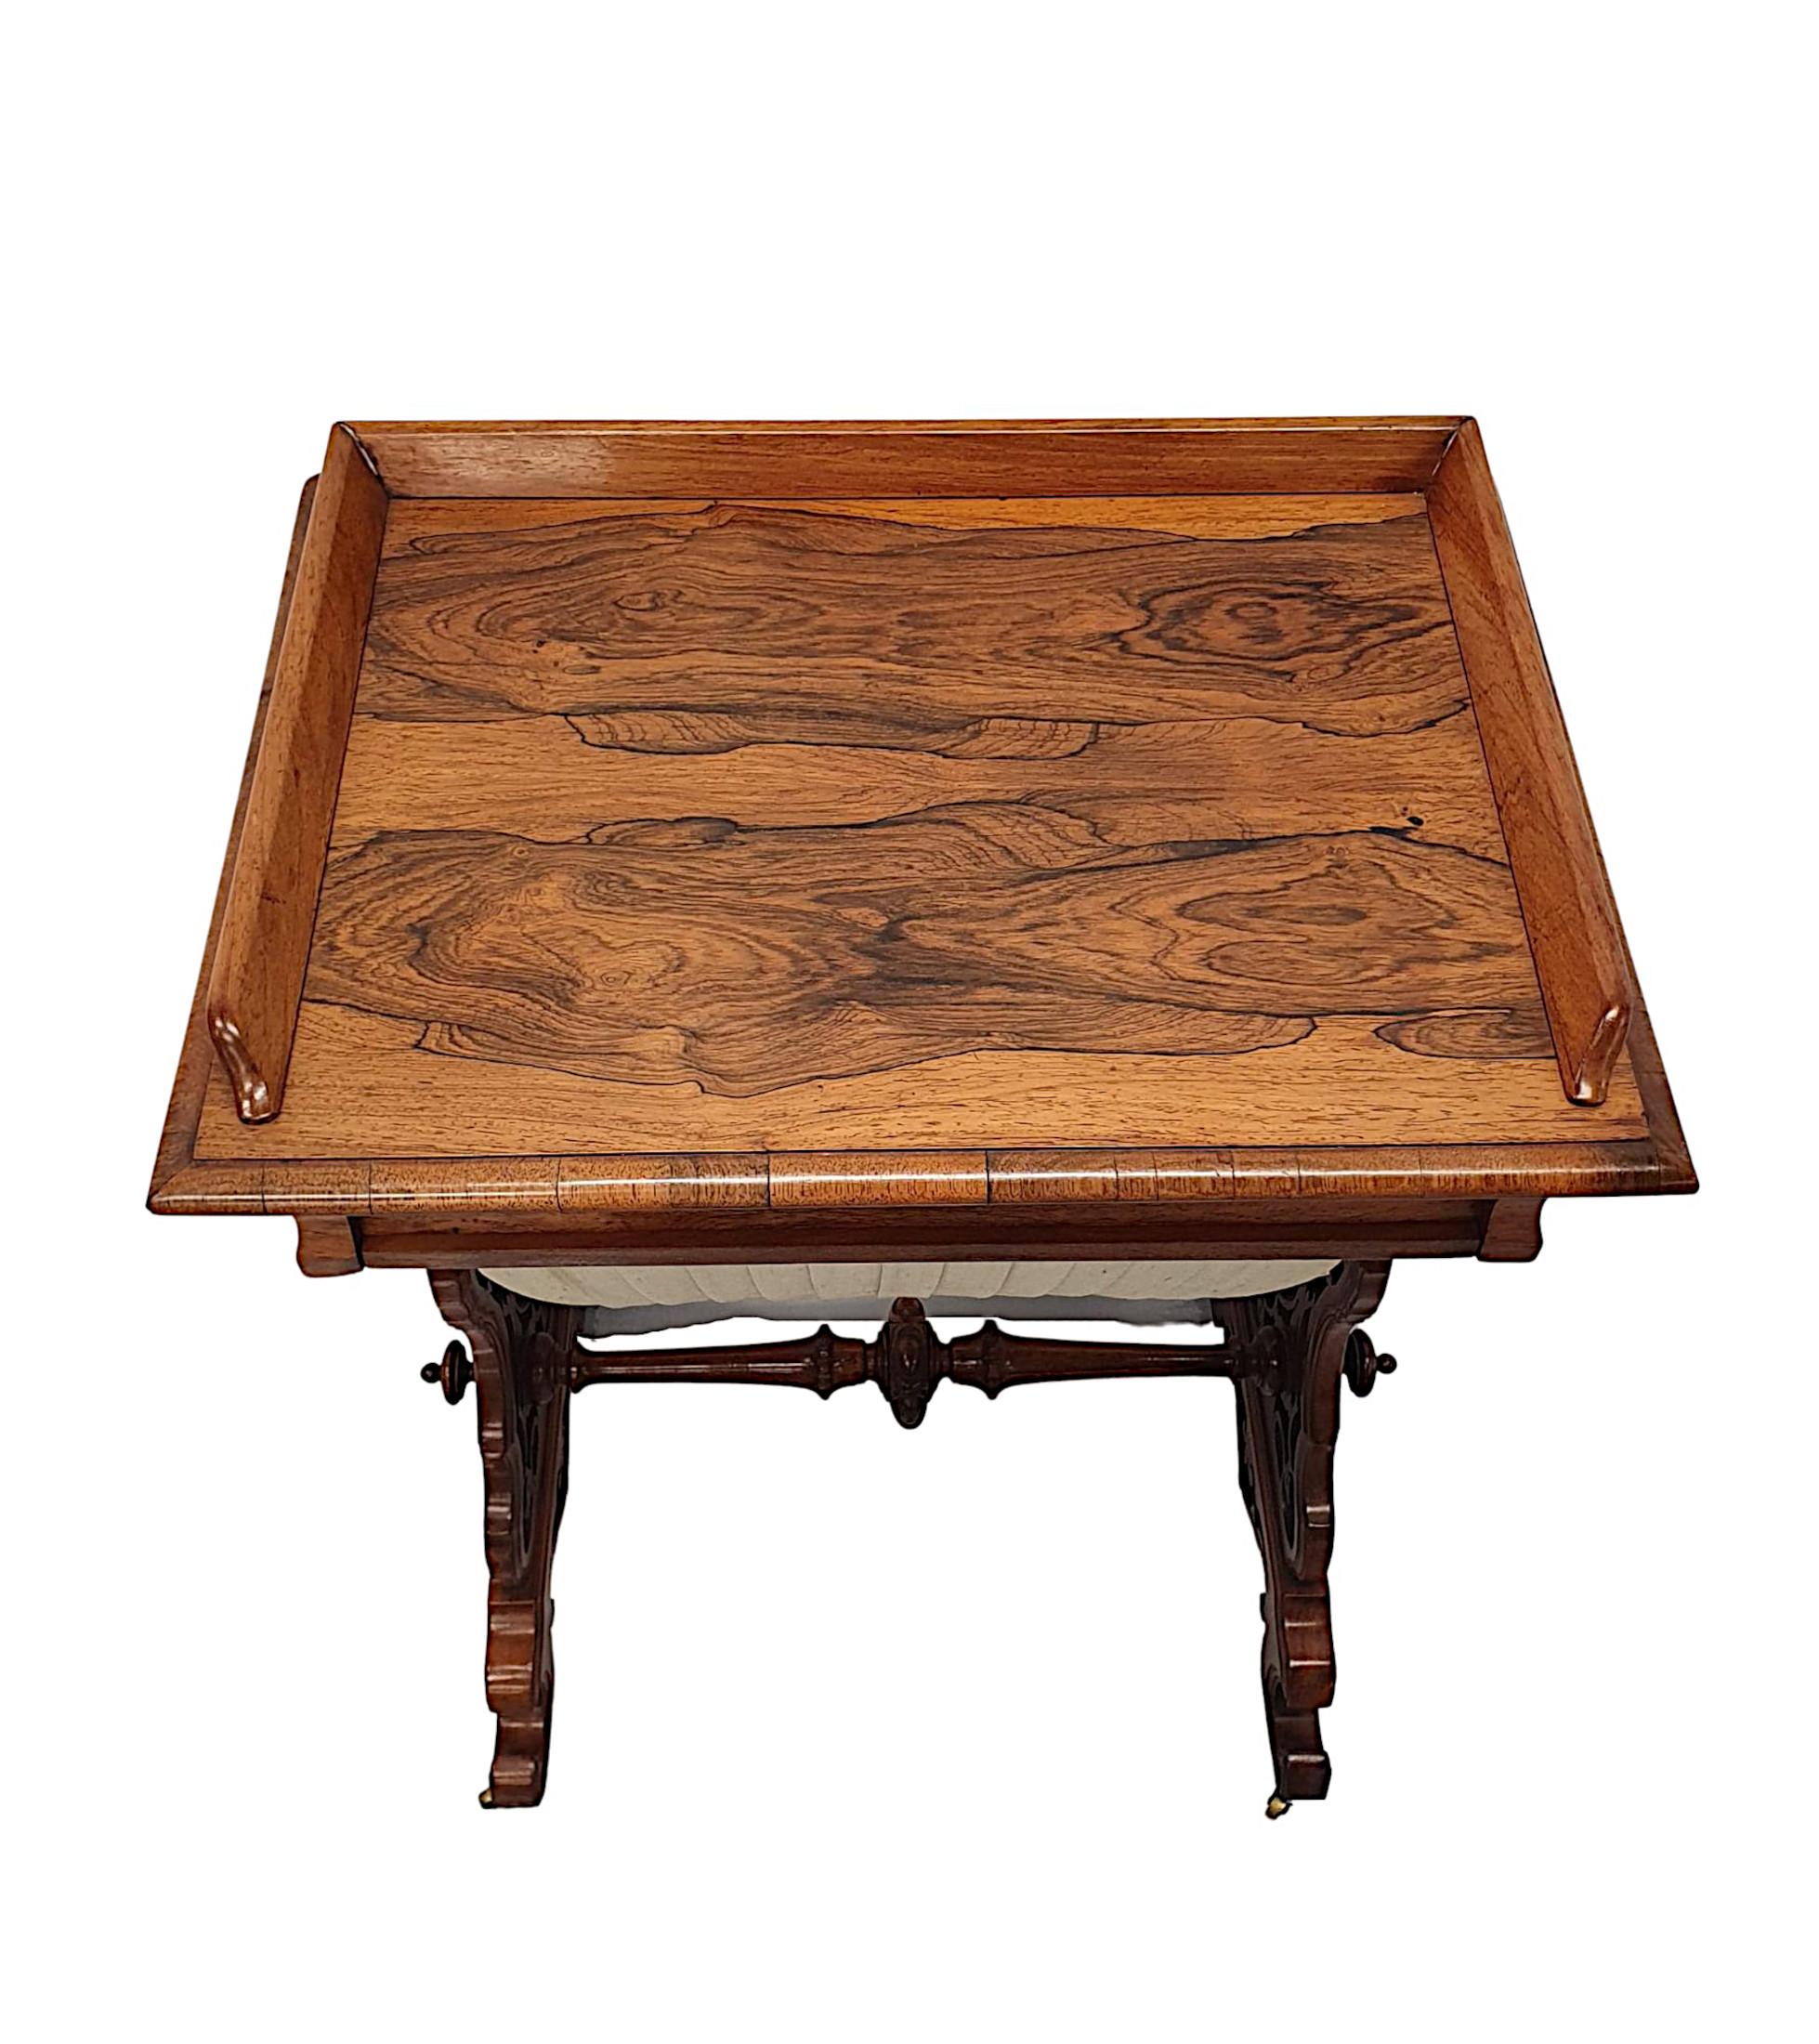 English Fabulous 19th Century Ladies Work Table For Sale